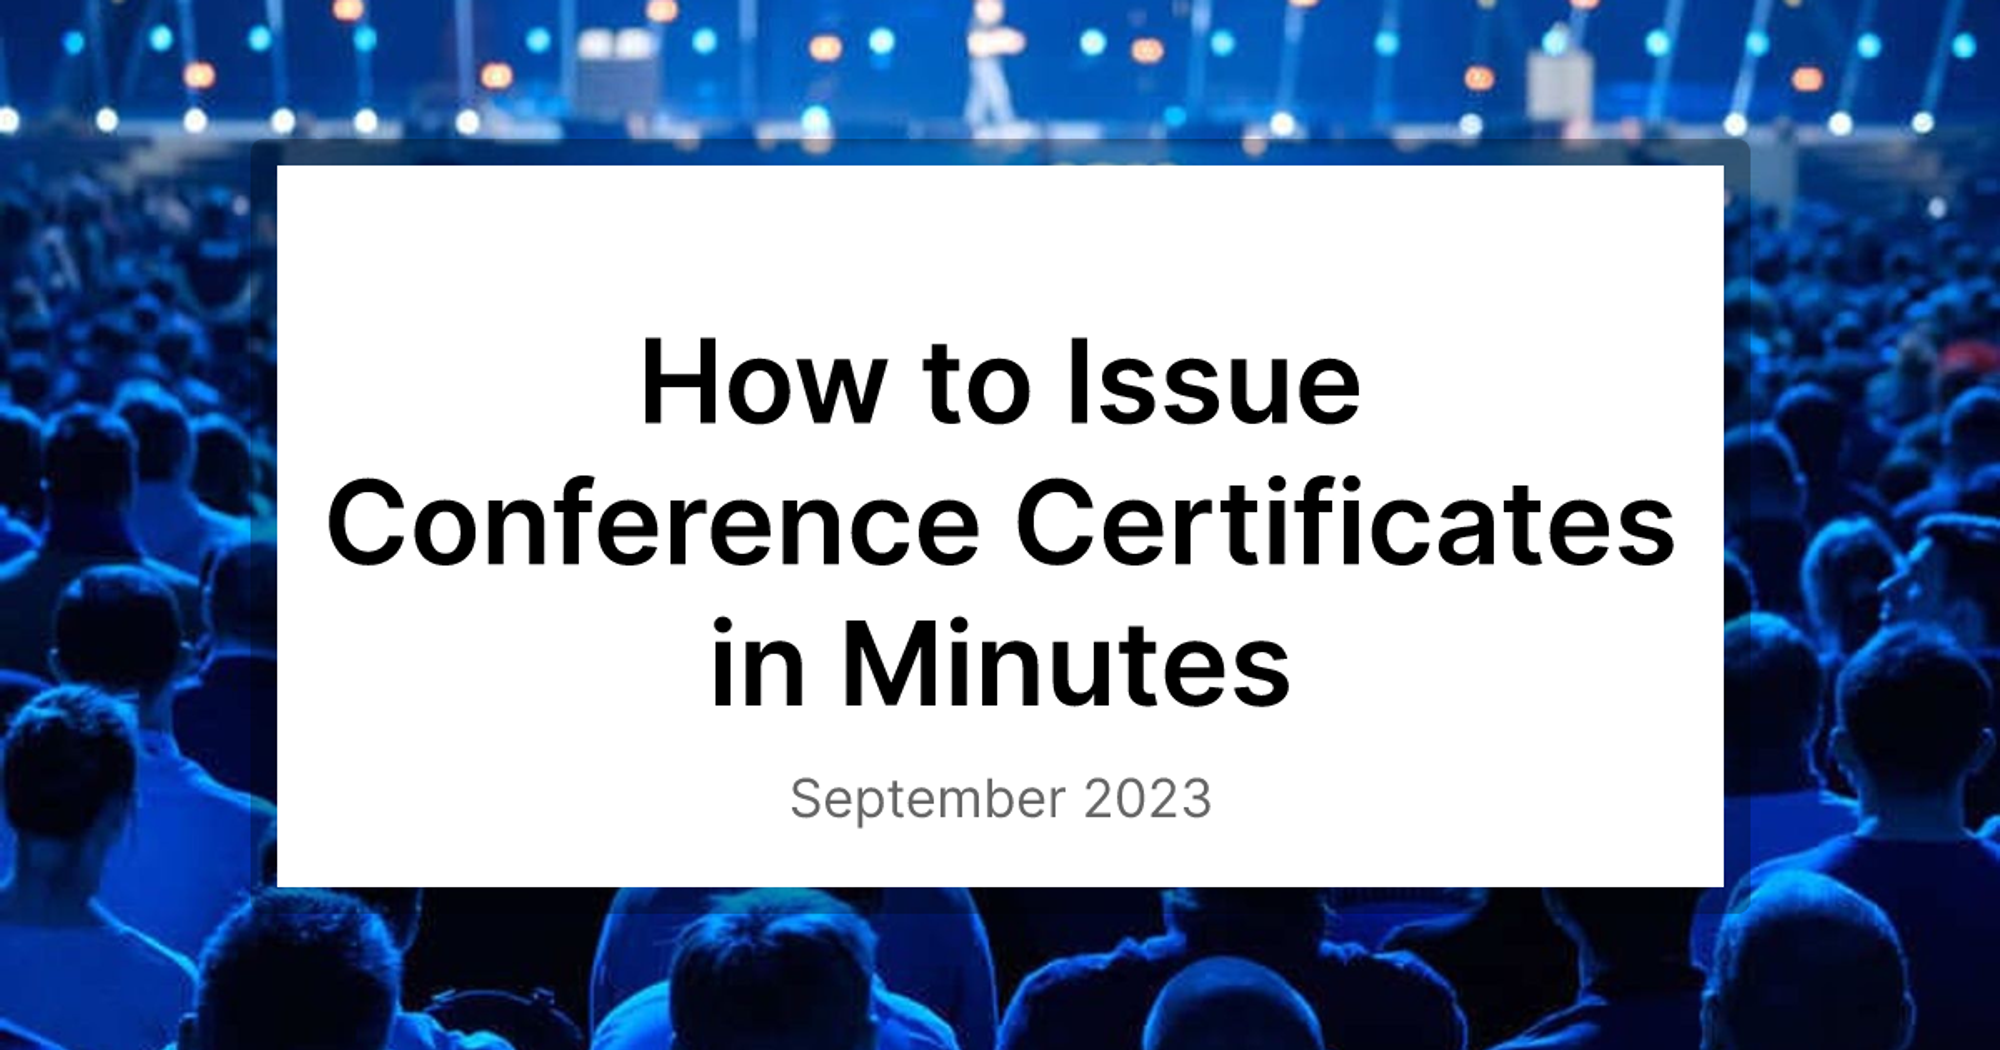 How to Issue Conference Certificates in Minutes